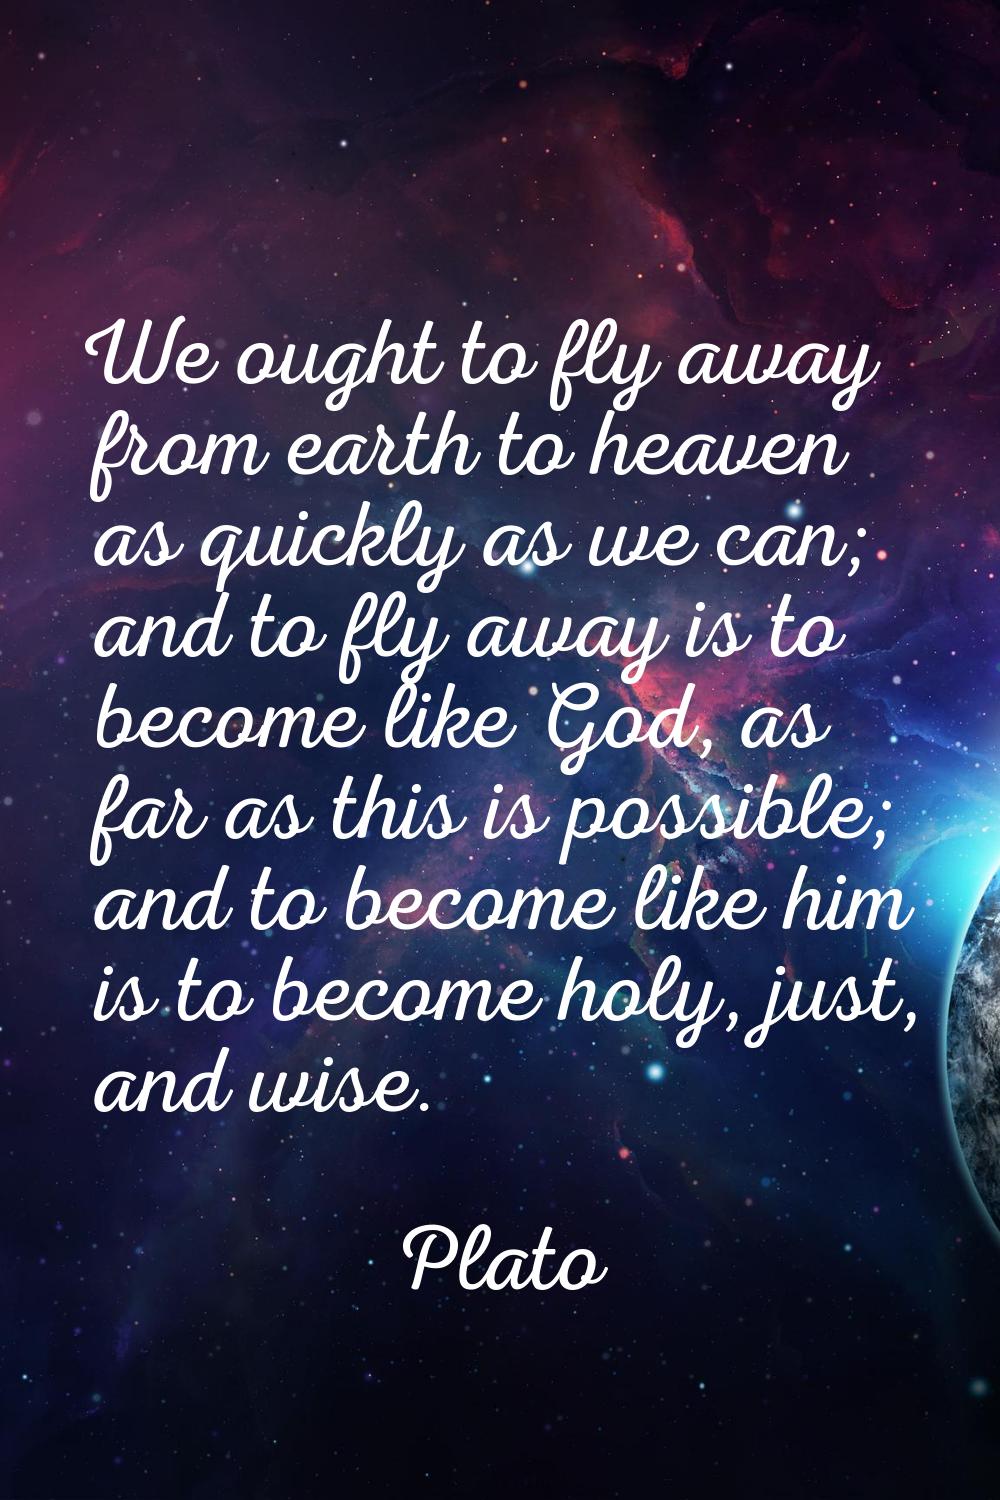 We ought to fly away from earth to heaven as quickly as we can; and to fly away is to become like G